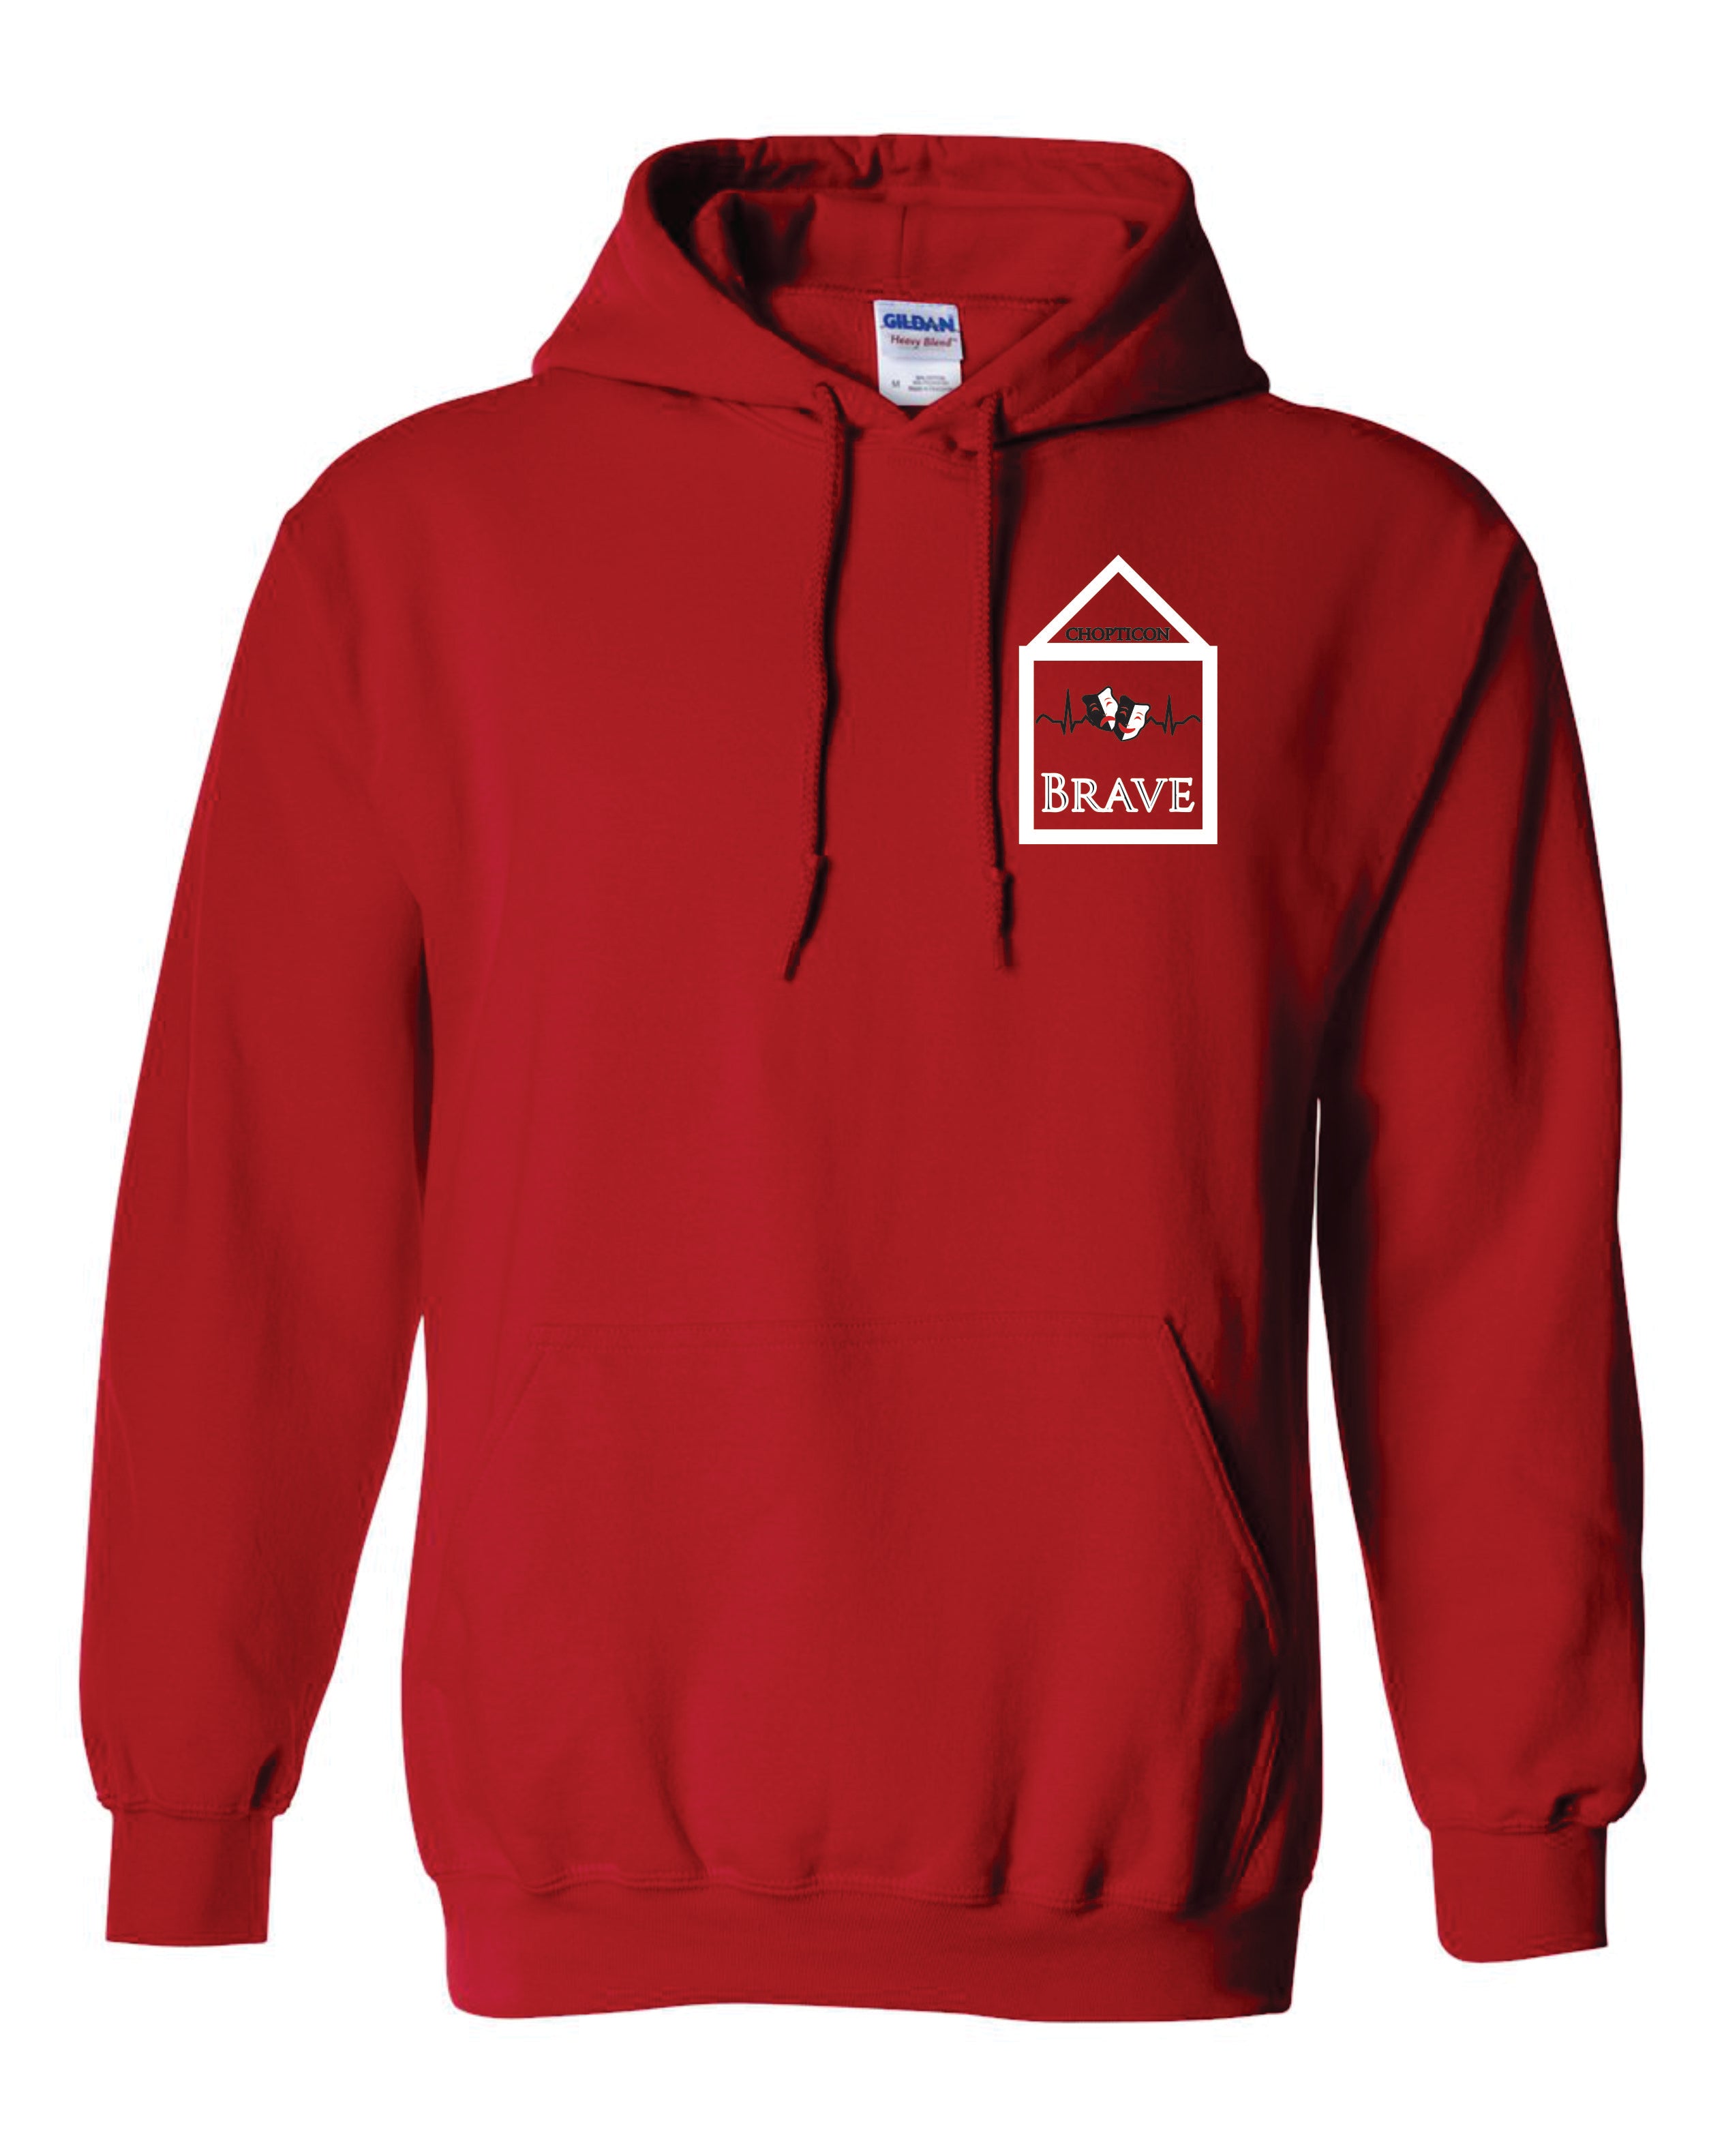 Chopticon Theater Cotton/poly  50/50 Hoodie